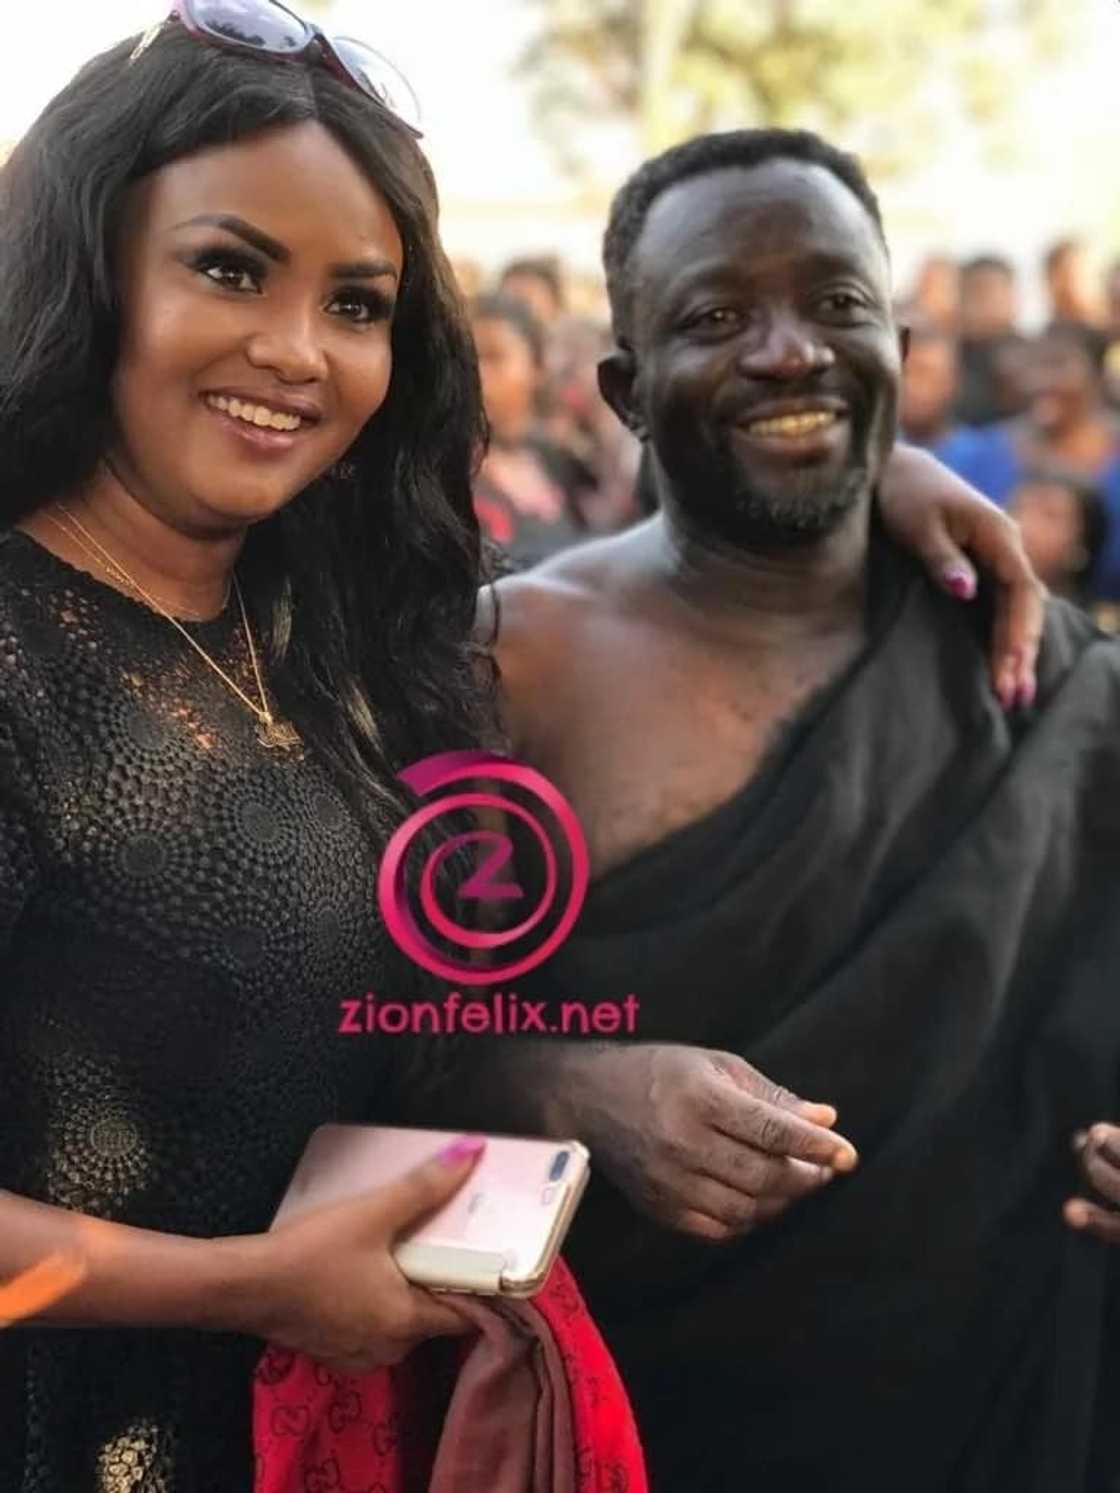 Nana Ama Mcbrown and Samuel Nyamekye clad in funeral clothing and smile for a photo